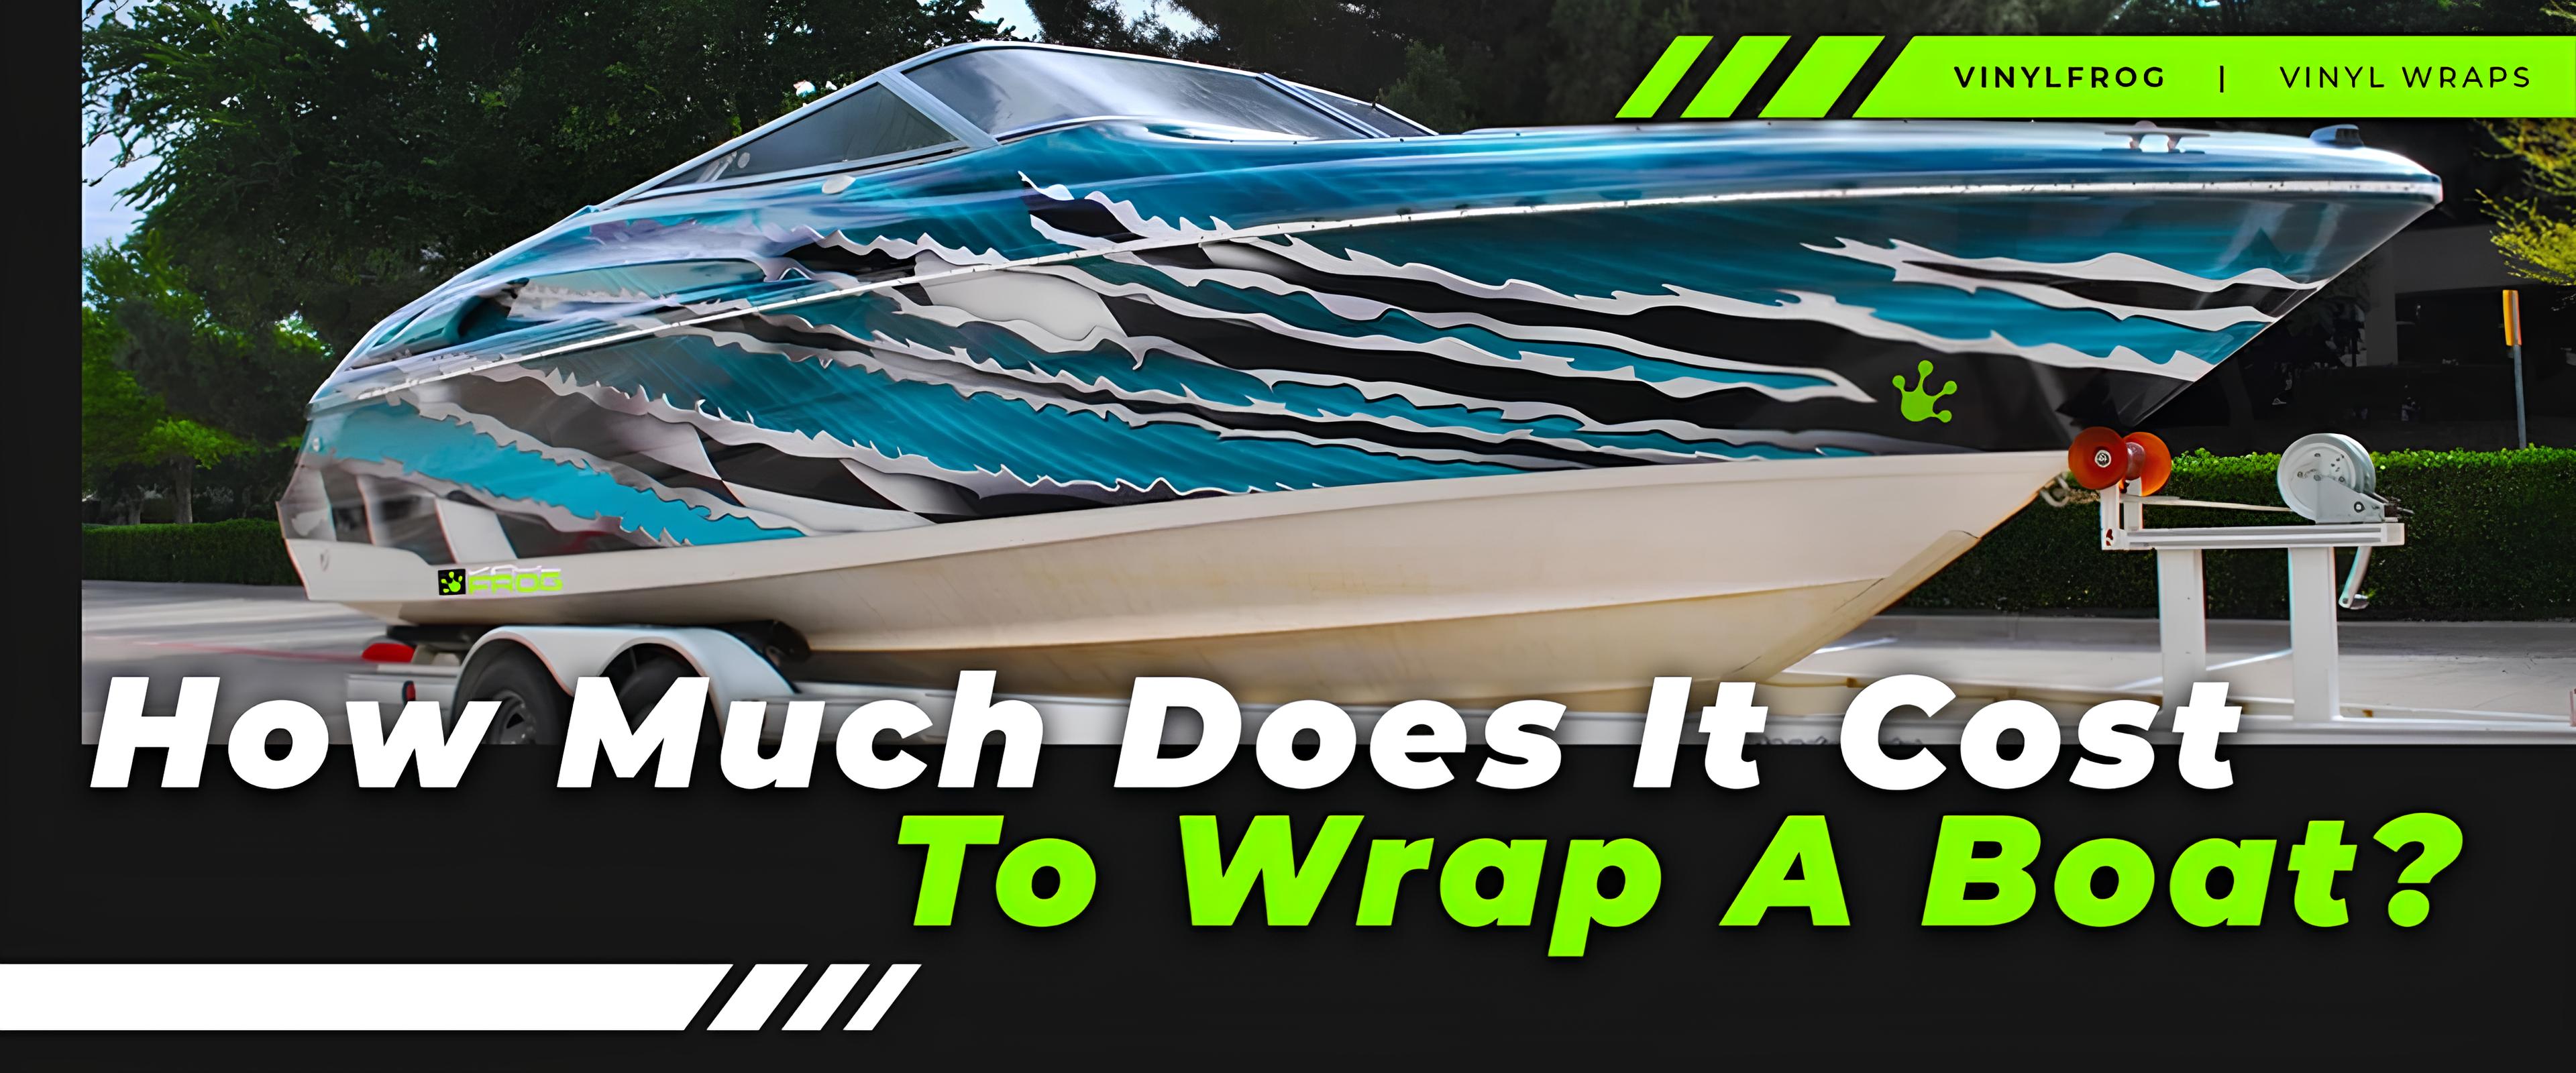 How Much Does It Cost To Wrap A Boat.jpg__PID:12dc6fbc-cf2f-4bab-871f-bca508478fca